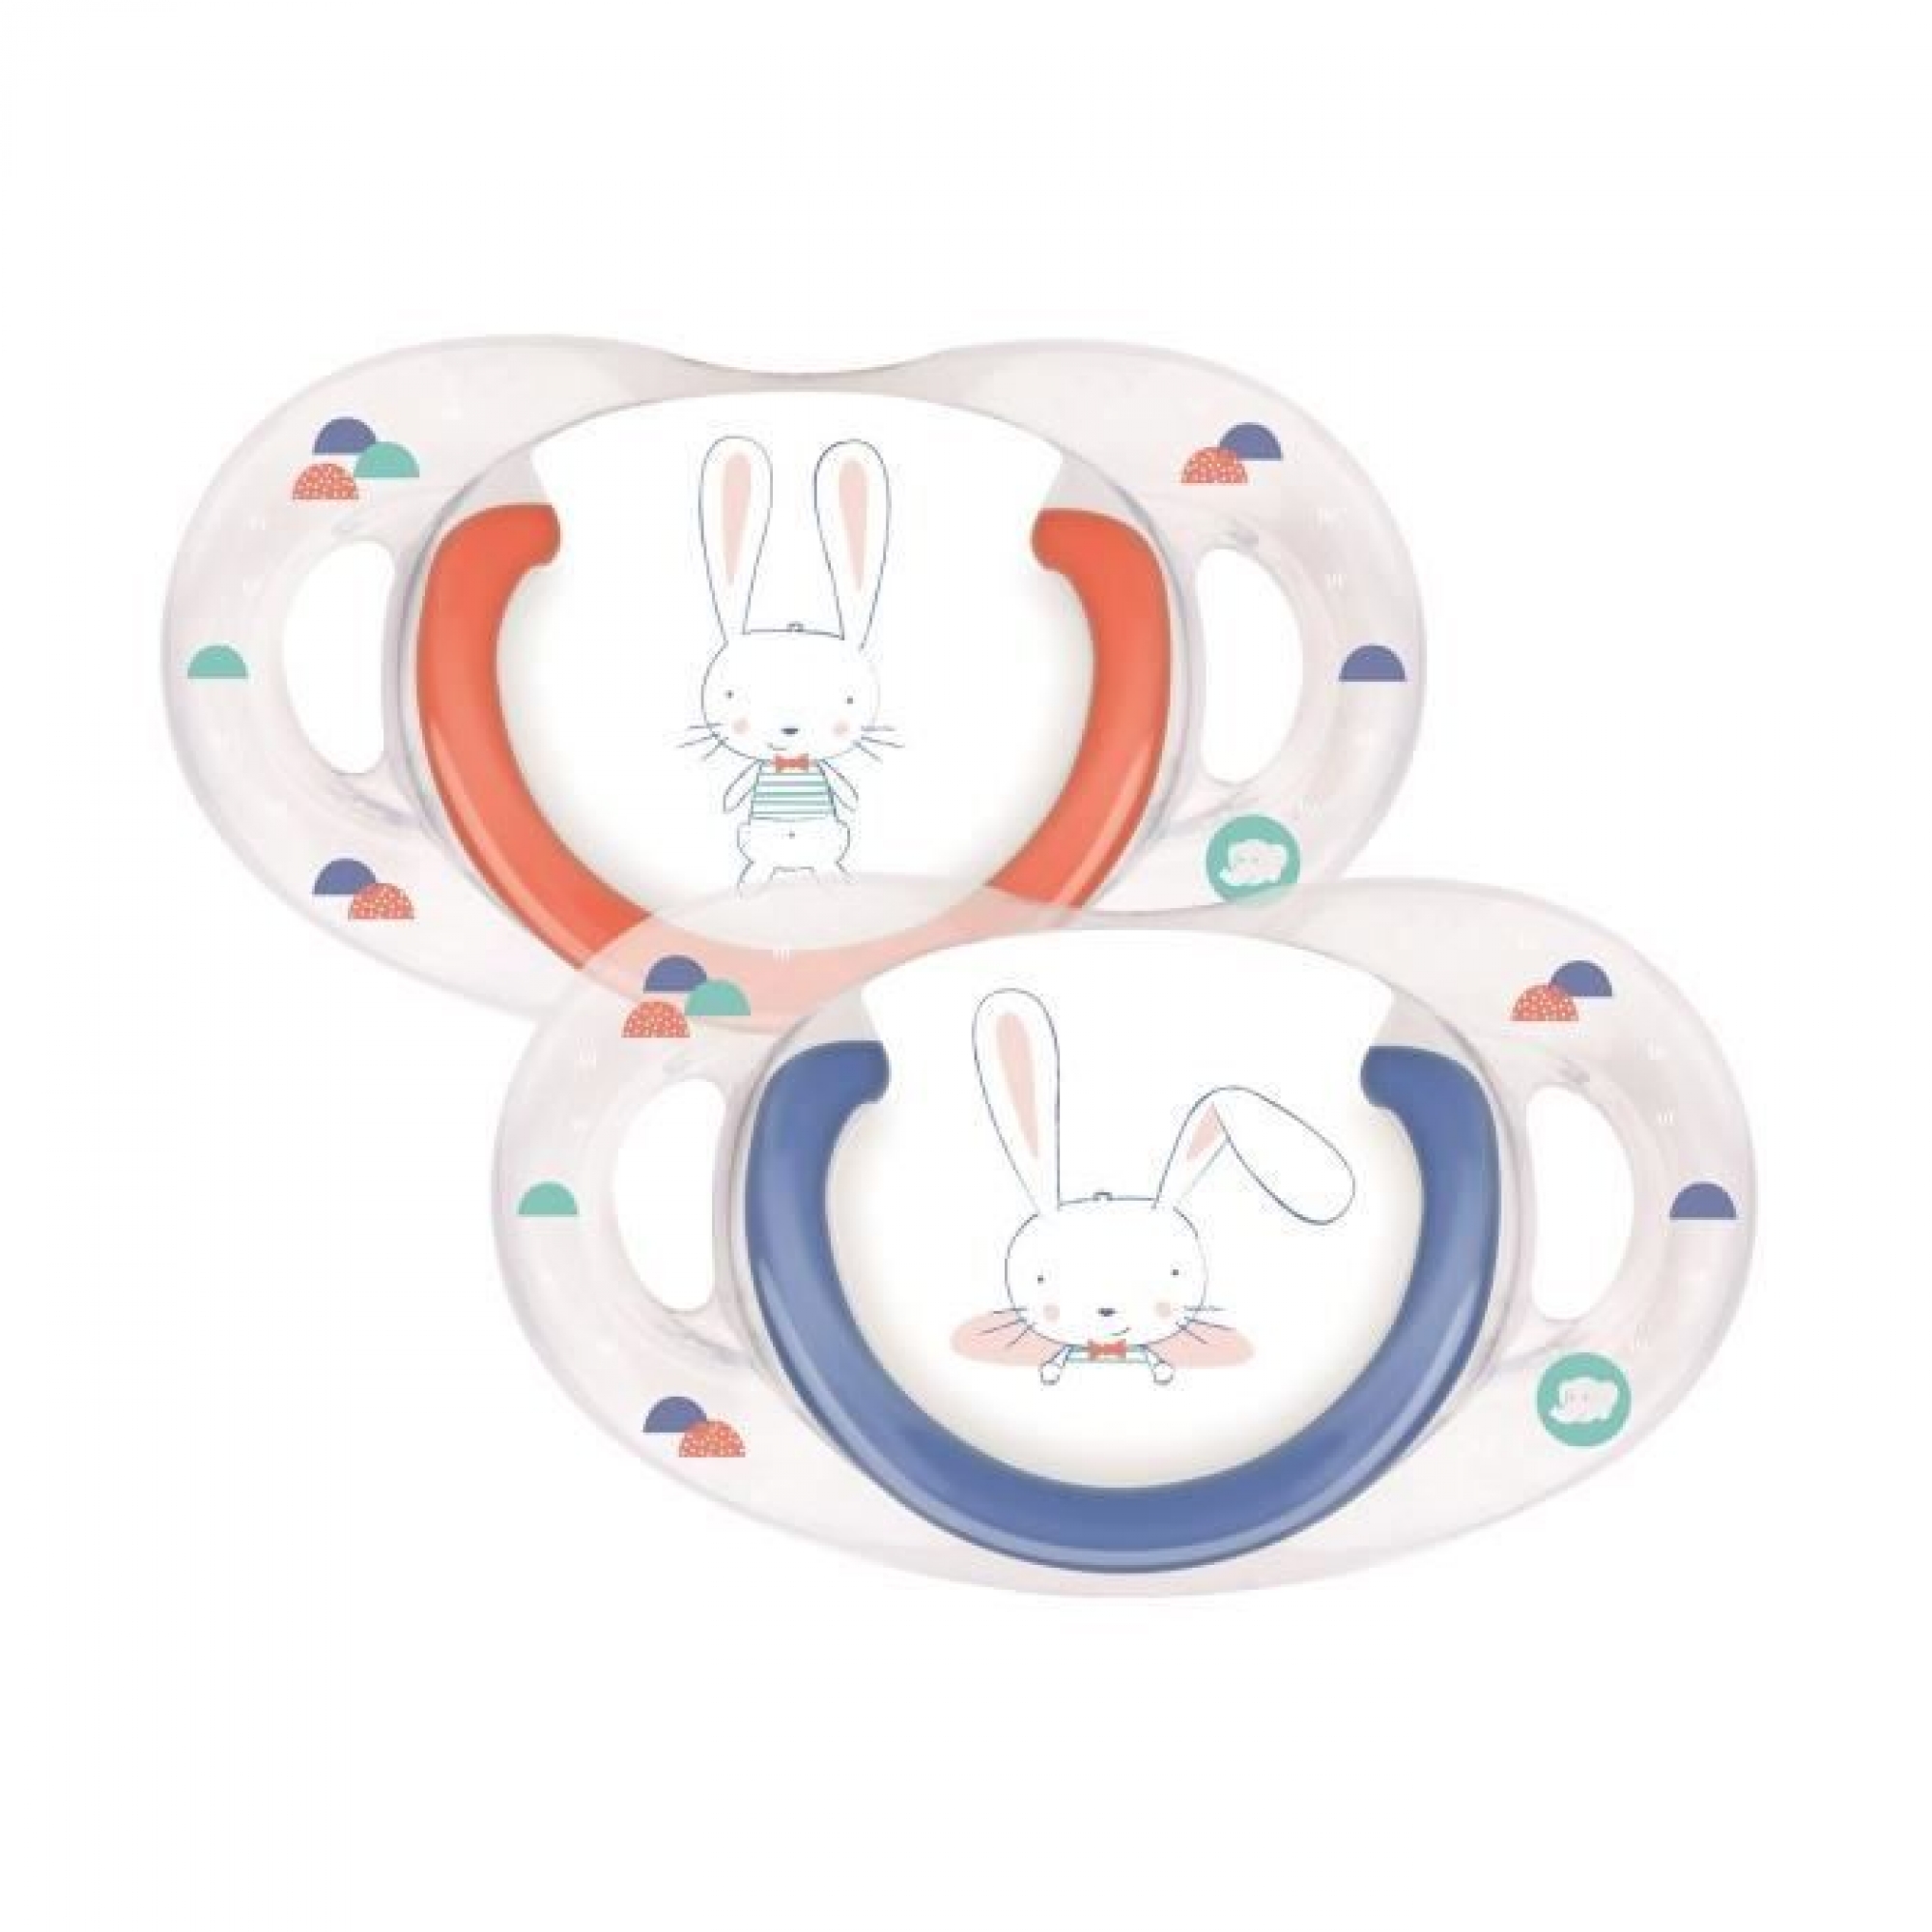 Bebe Confort Lot De 2 Sucettes Natural Physio En Silicone 18 36 Mois Sweet Bunny Bleu Et Rouge Made In Bebe